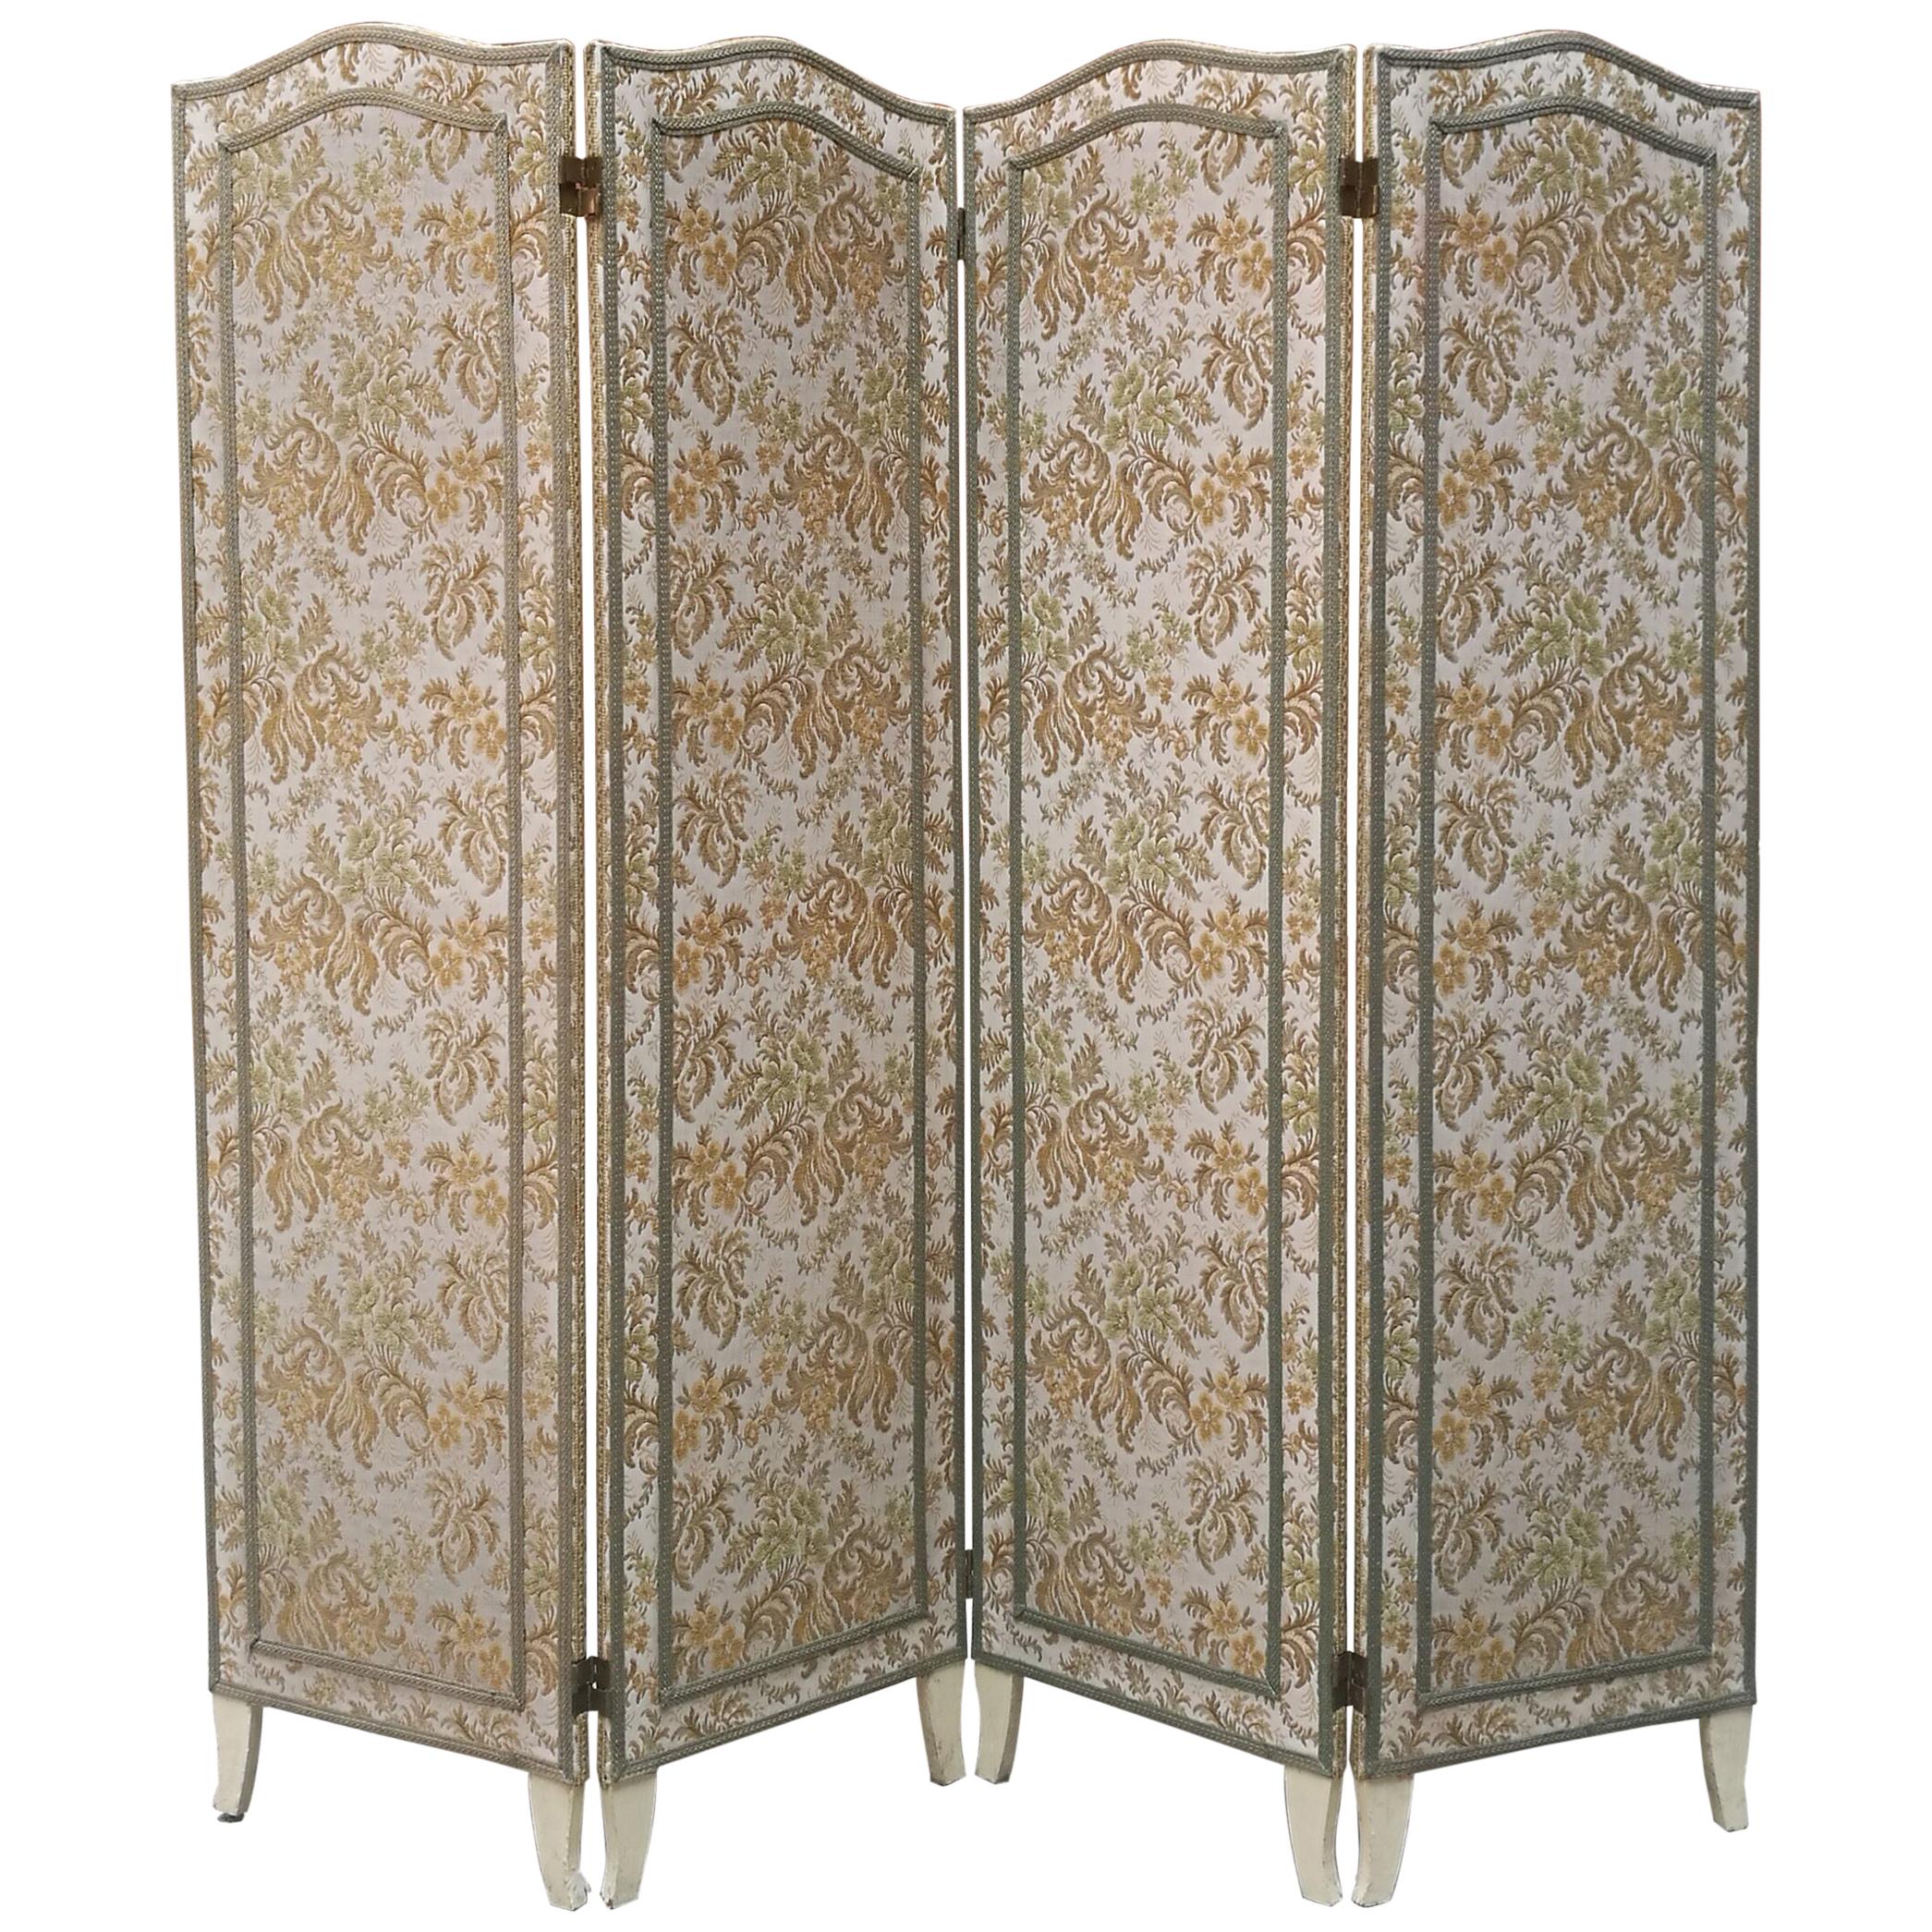 Italian four-wing floral fabric screen, 1940s